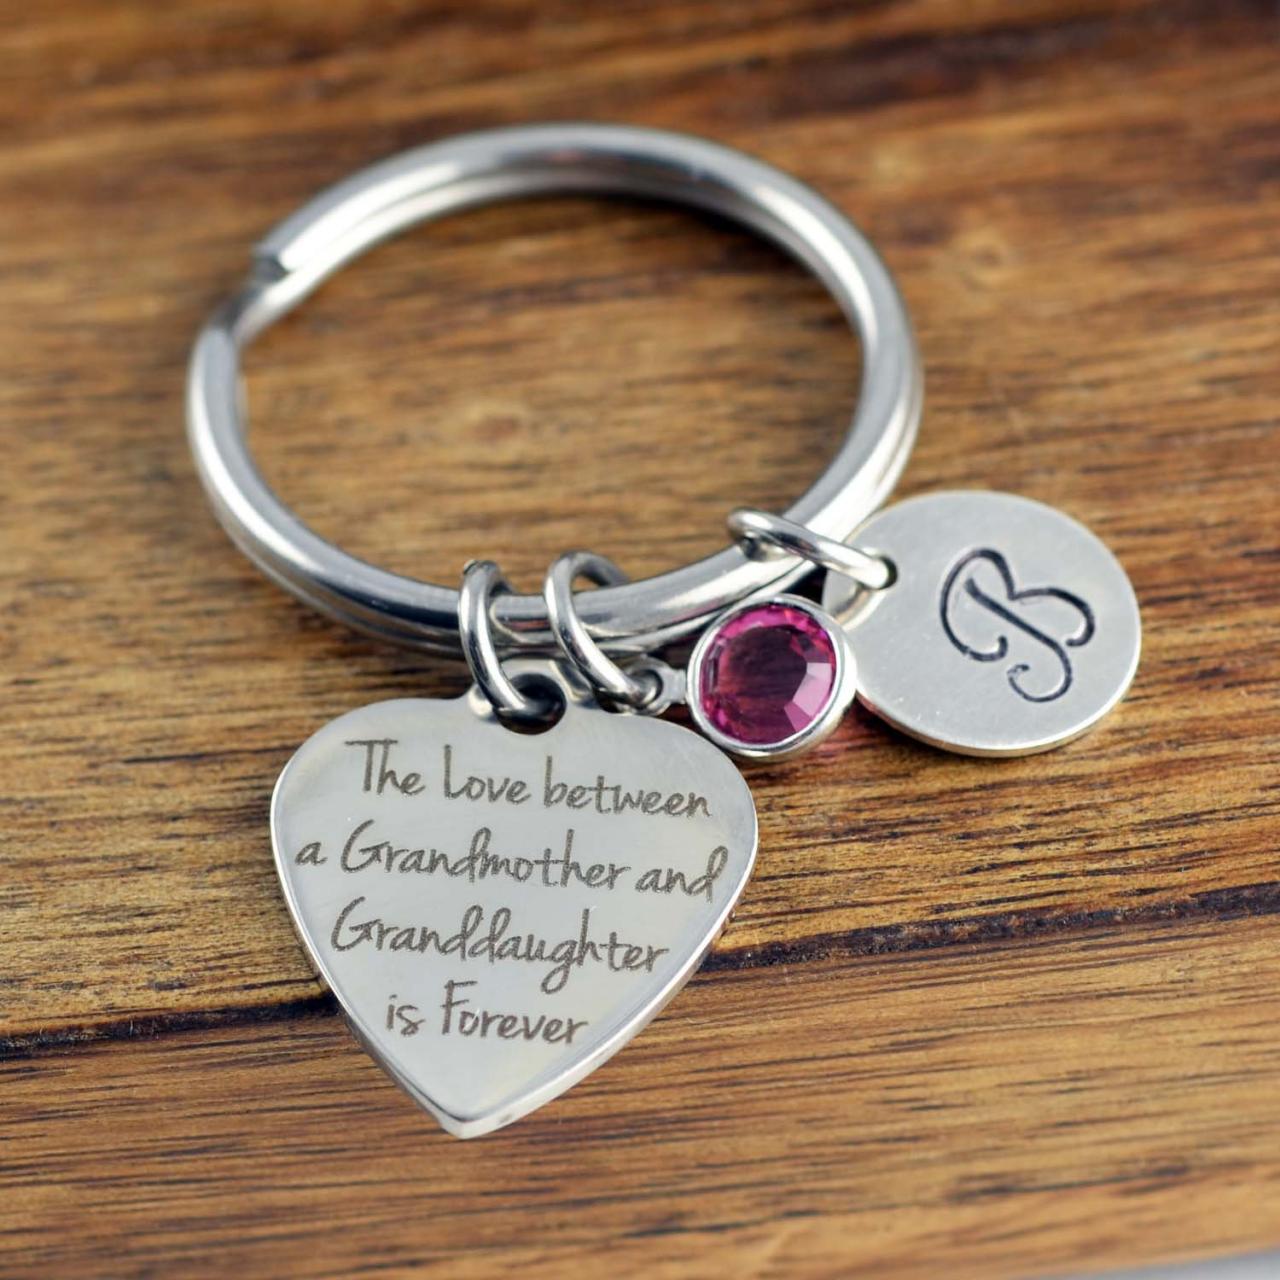 The Love Between A Grandmother And Granddaughter Is Forever Keychain, Gift For Grandmother, Gift For Grandma, Grandmother Gift, Grandma Gift